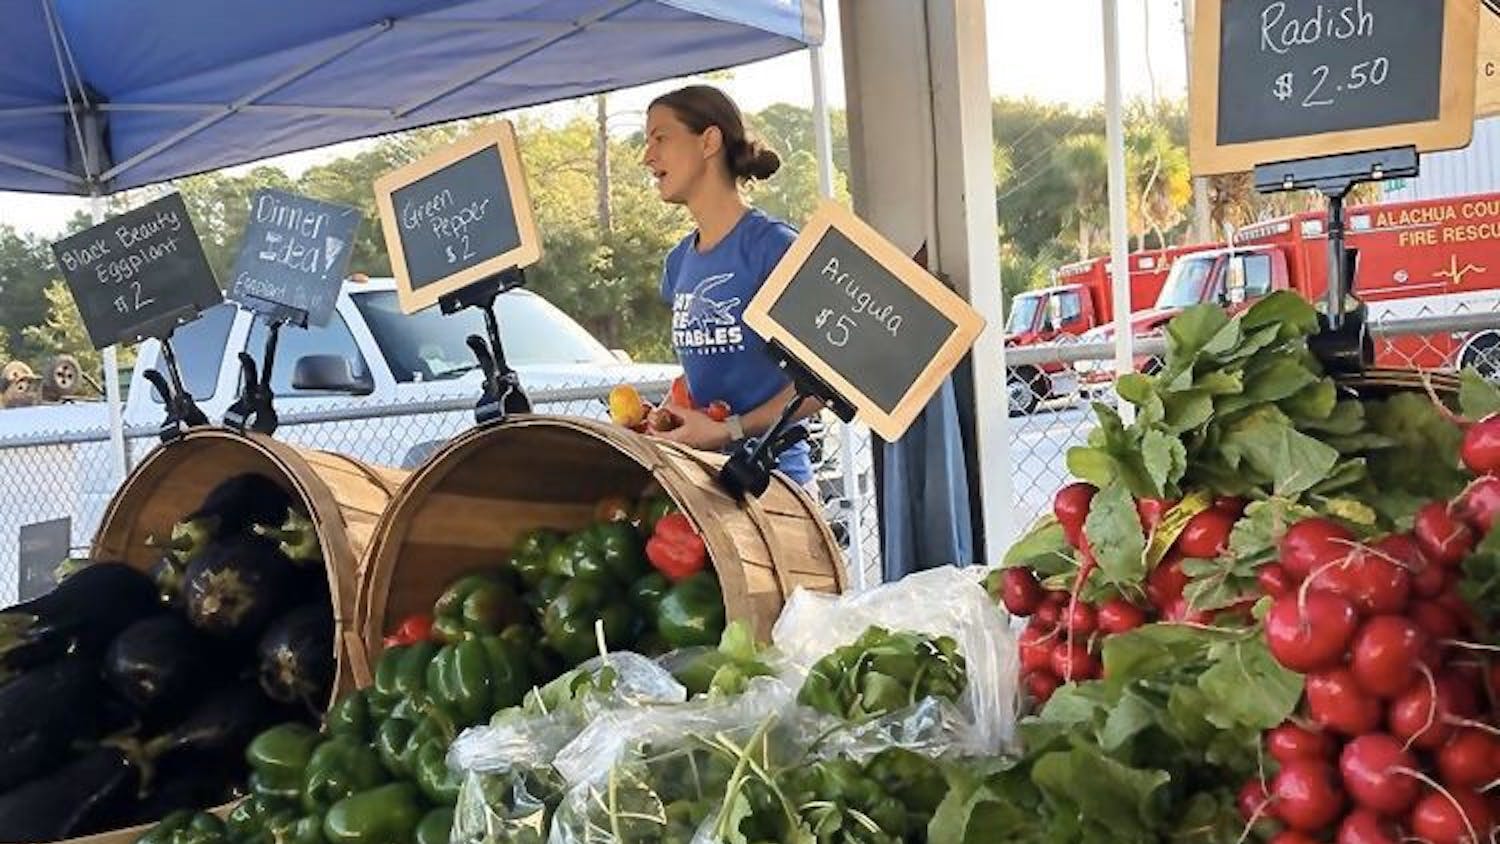 The Family Garden sells their produce at the Alachua County Farmers Market on Oct. 26. Now, they’re watching unsold produce rot in their fields due to COVID-19.